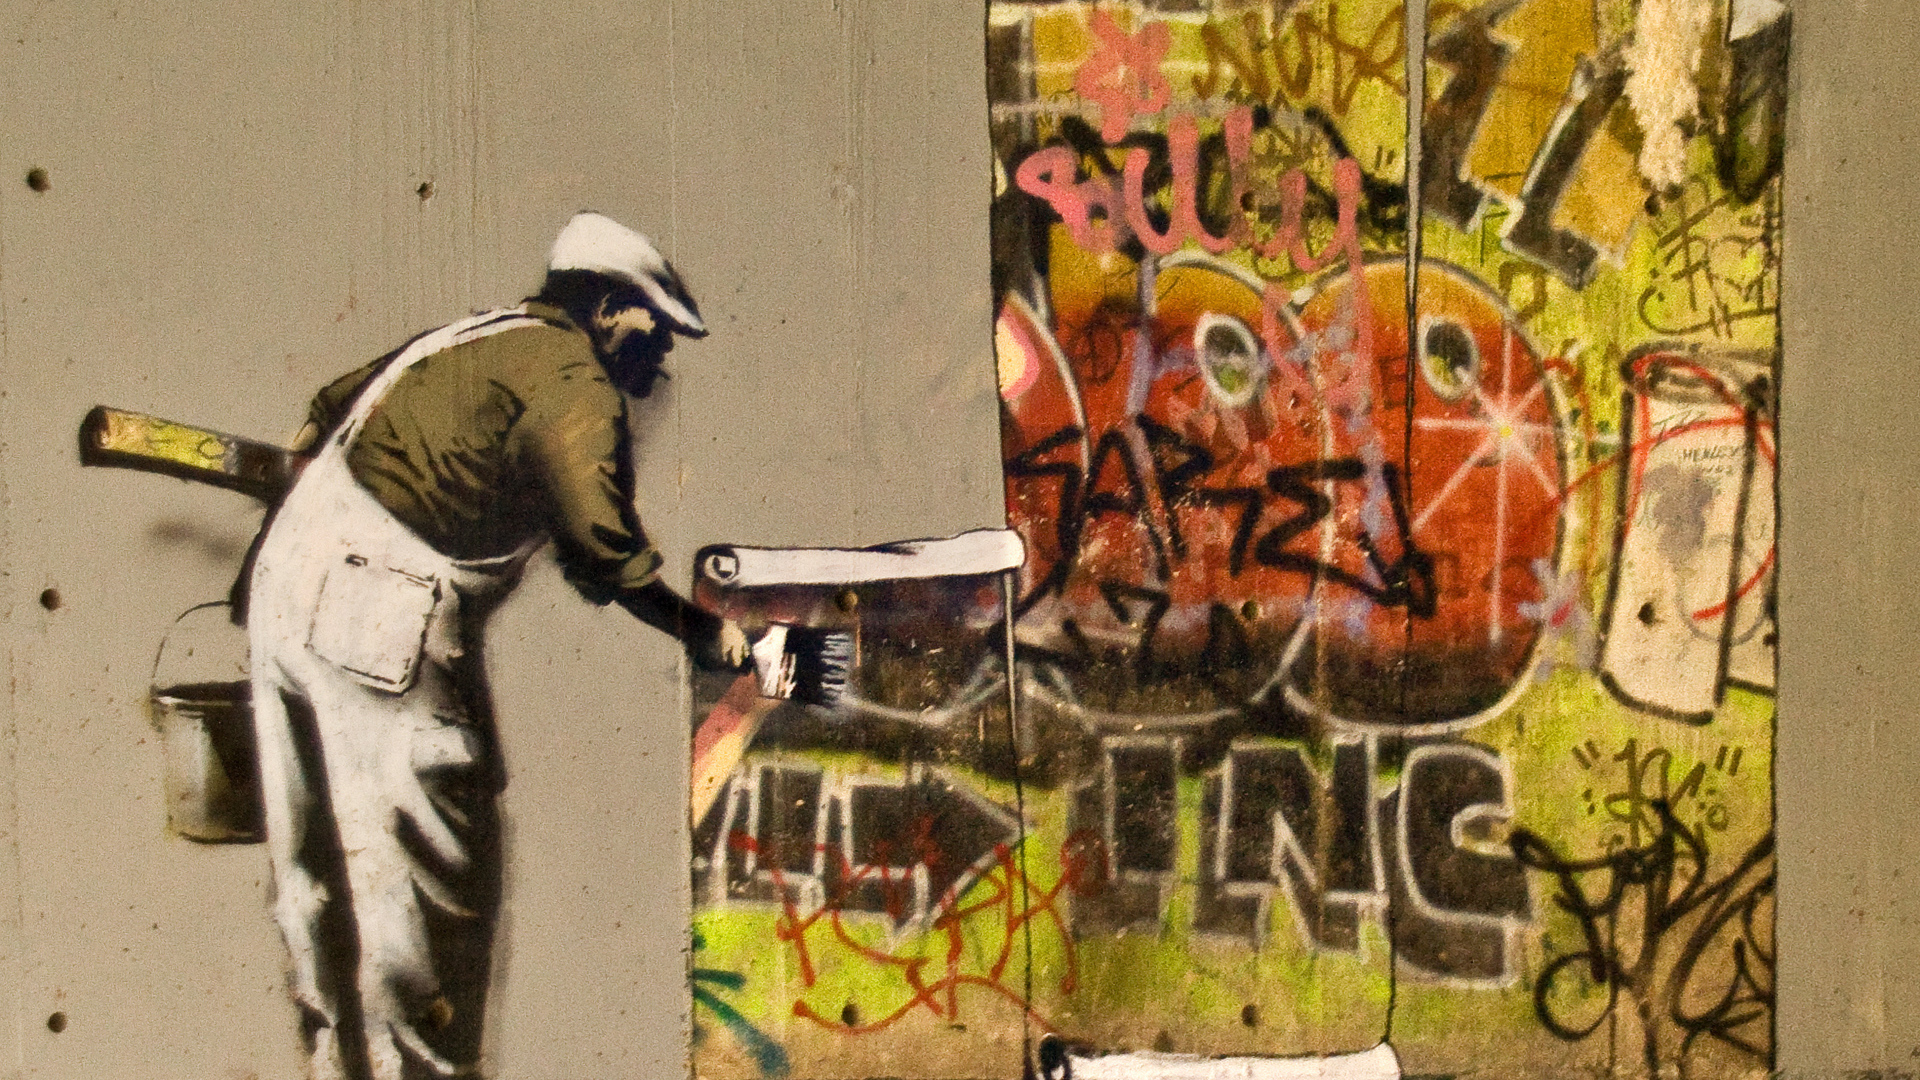 Another look at the graffiti, artist Banksy